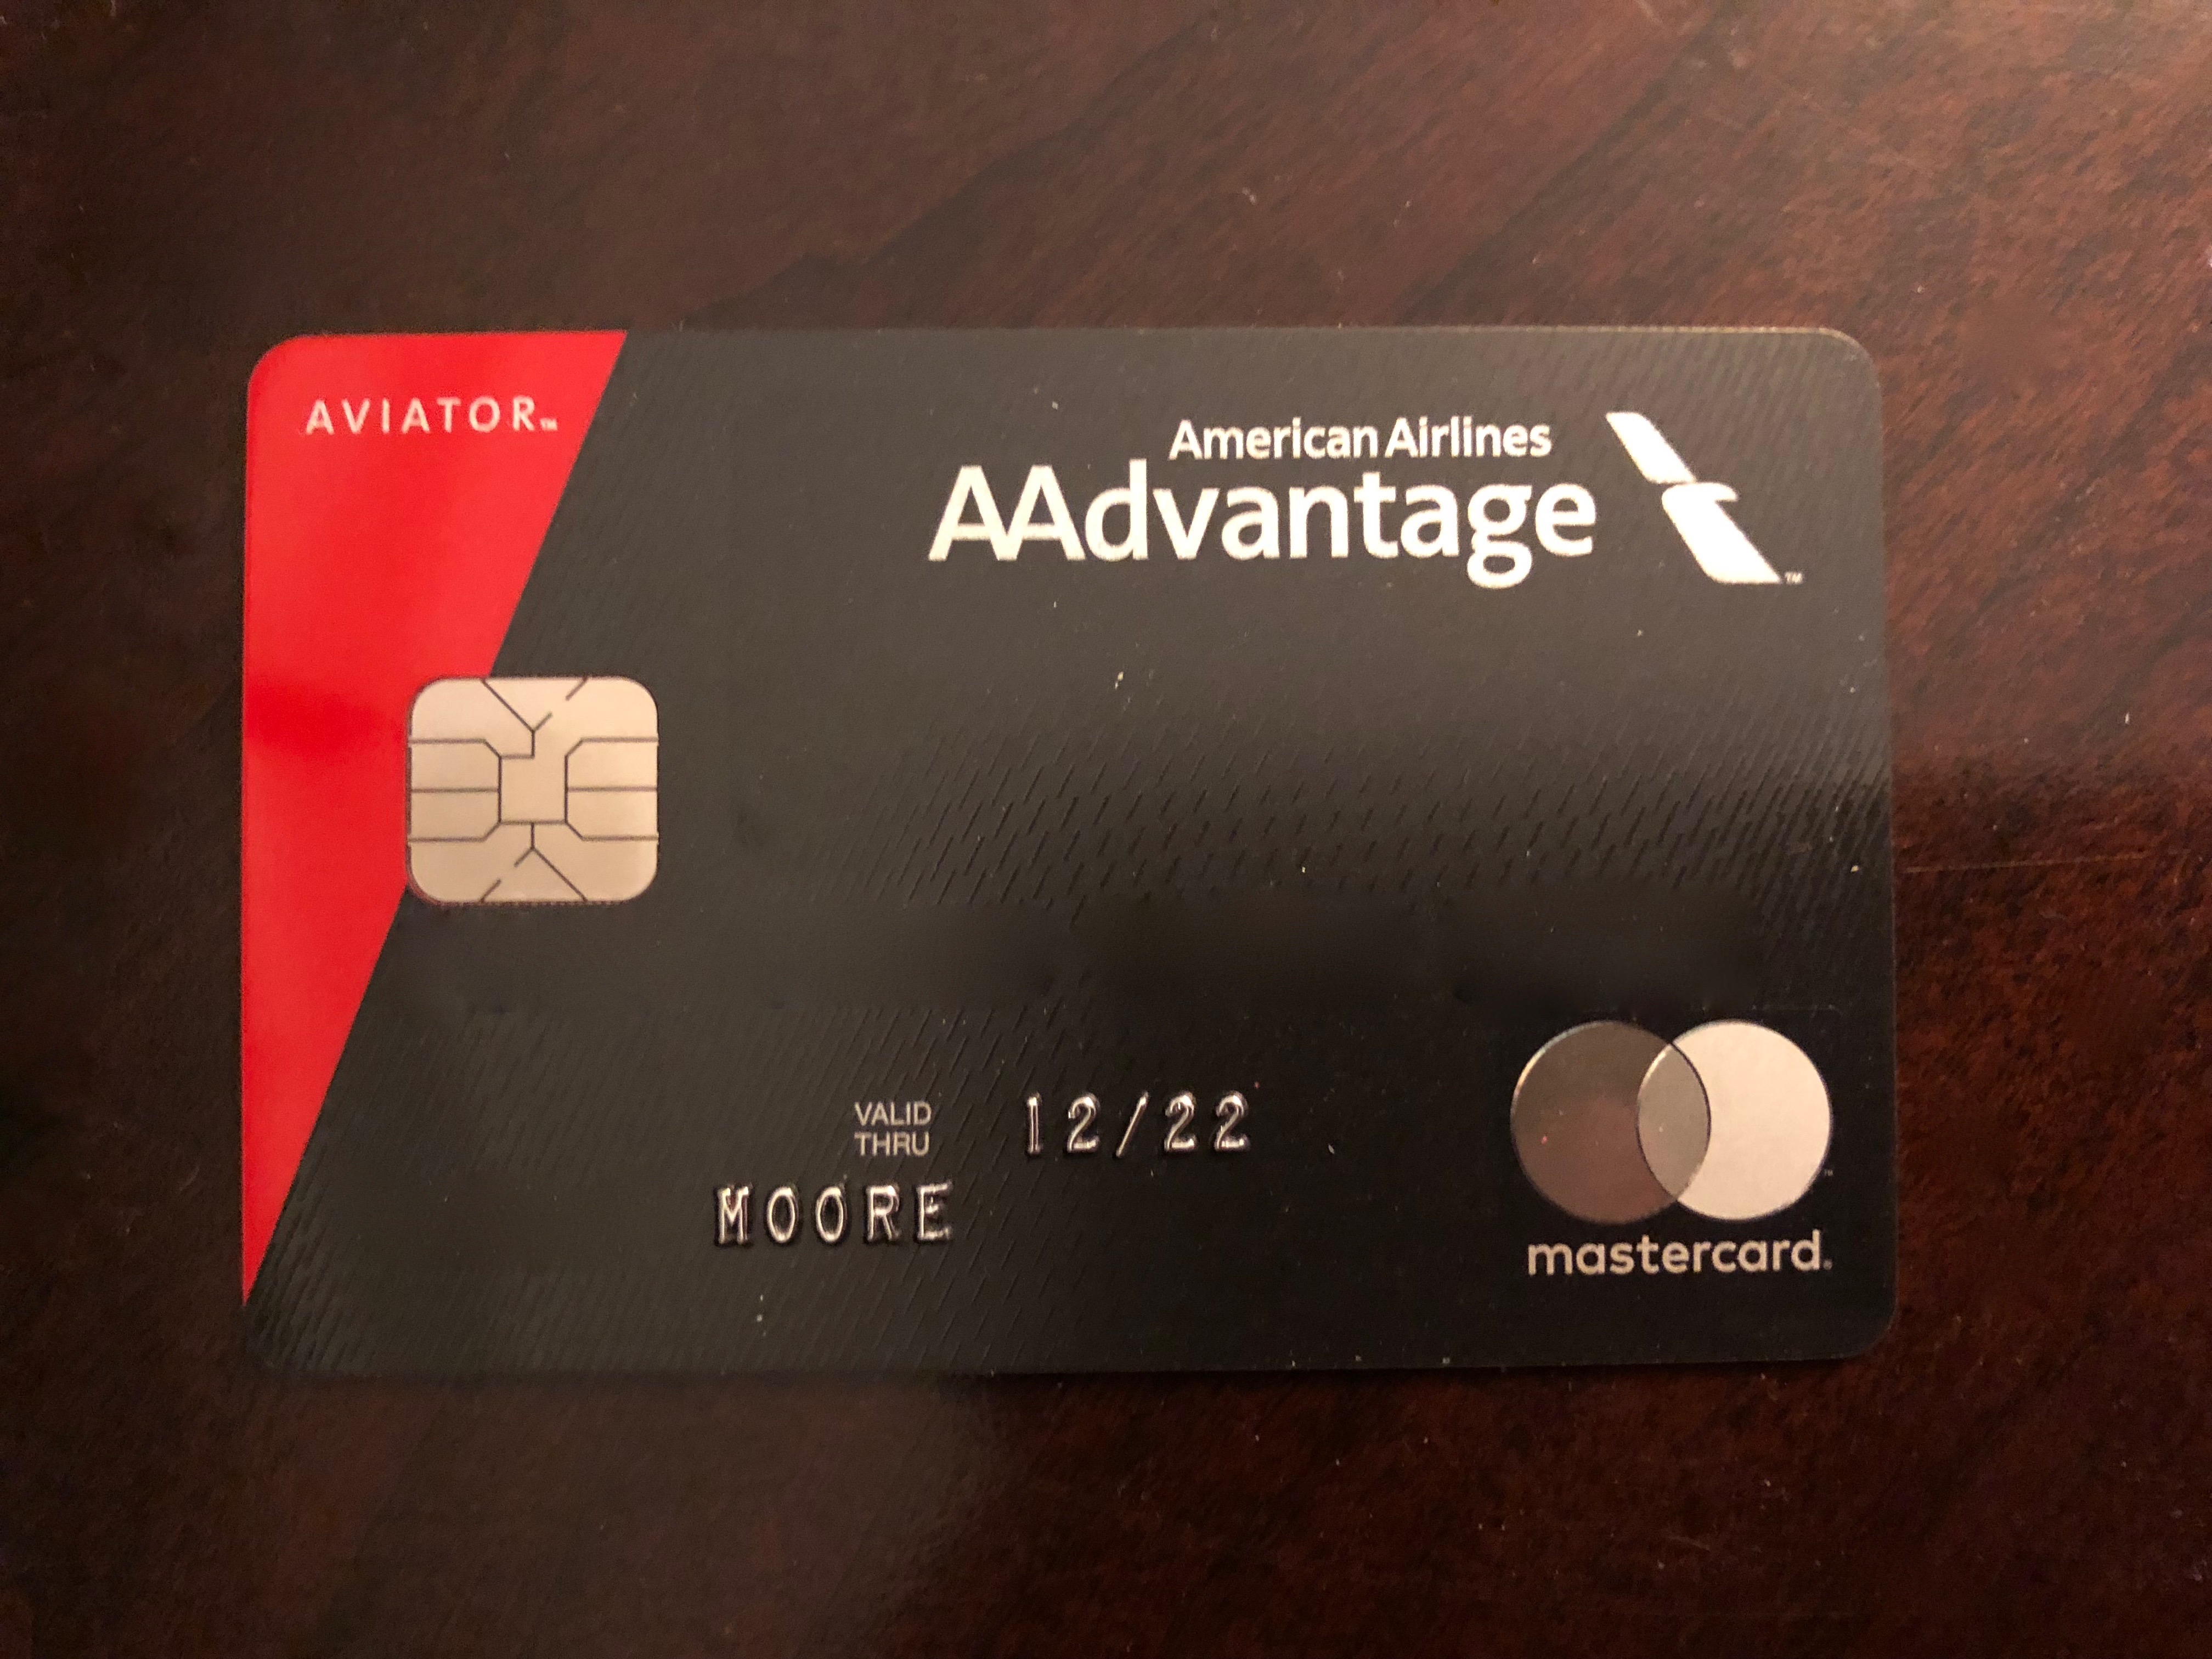 Barclaycard AAdvantage Aviator Red Card Benefits - Moore With Miles